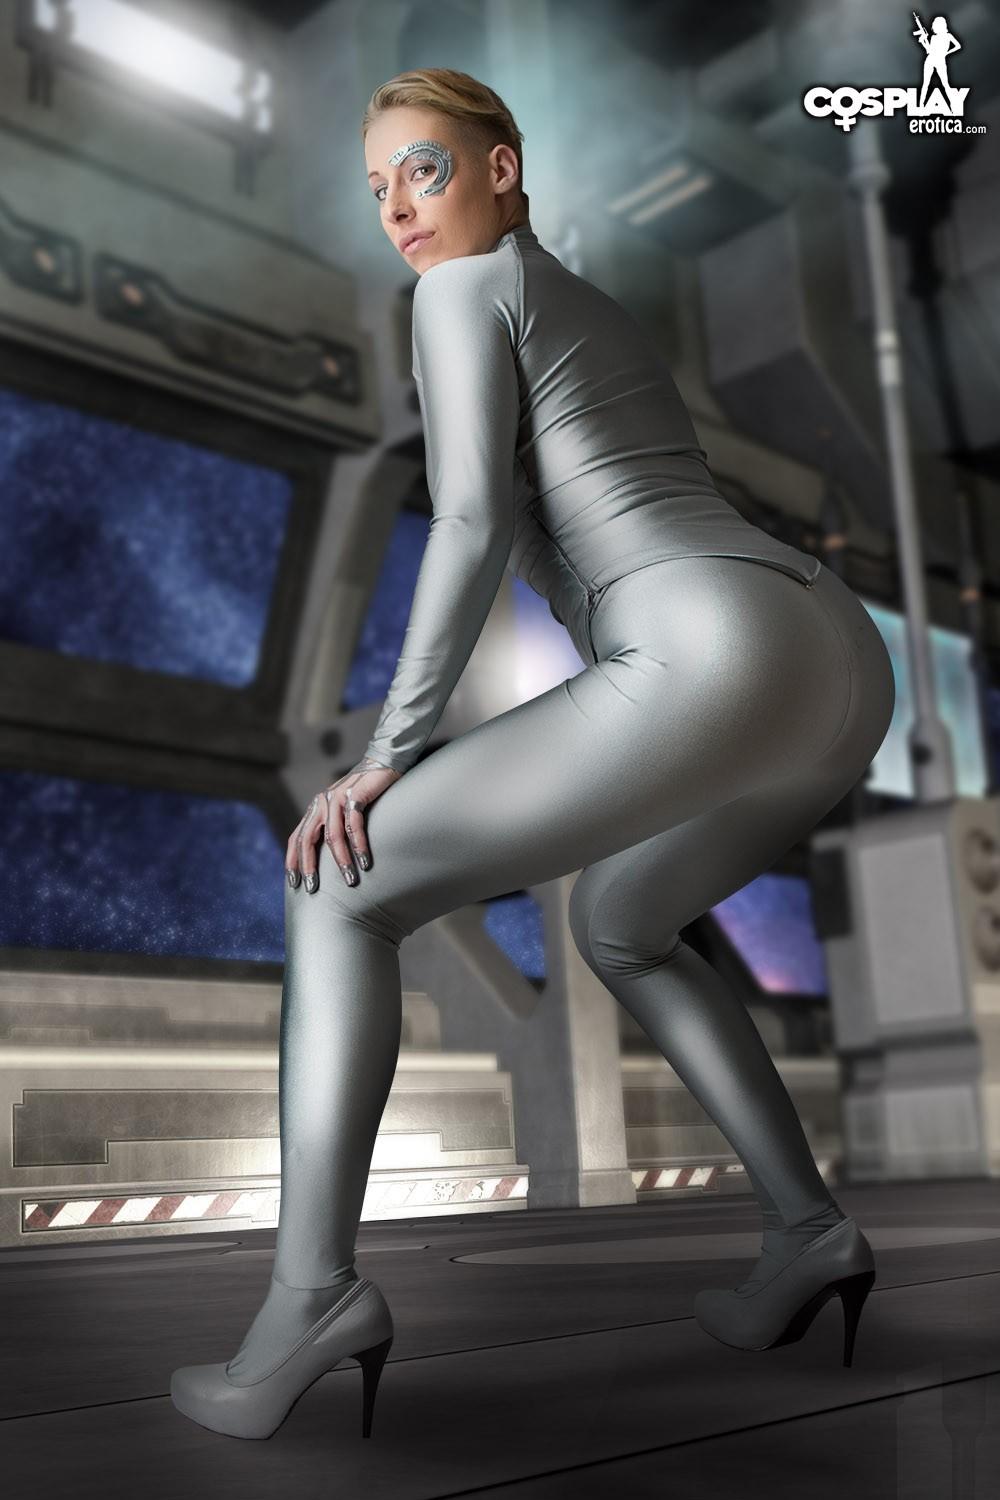 Hot cosplay girl Sandy Bell is your fantasy Seven of Nine for the night #59902277